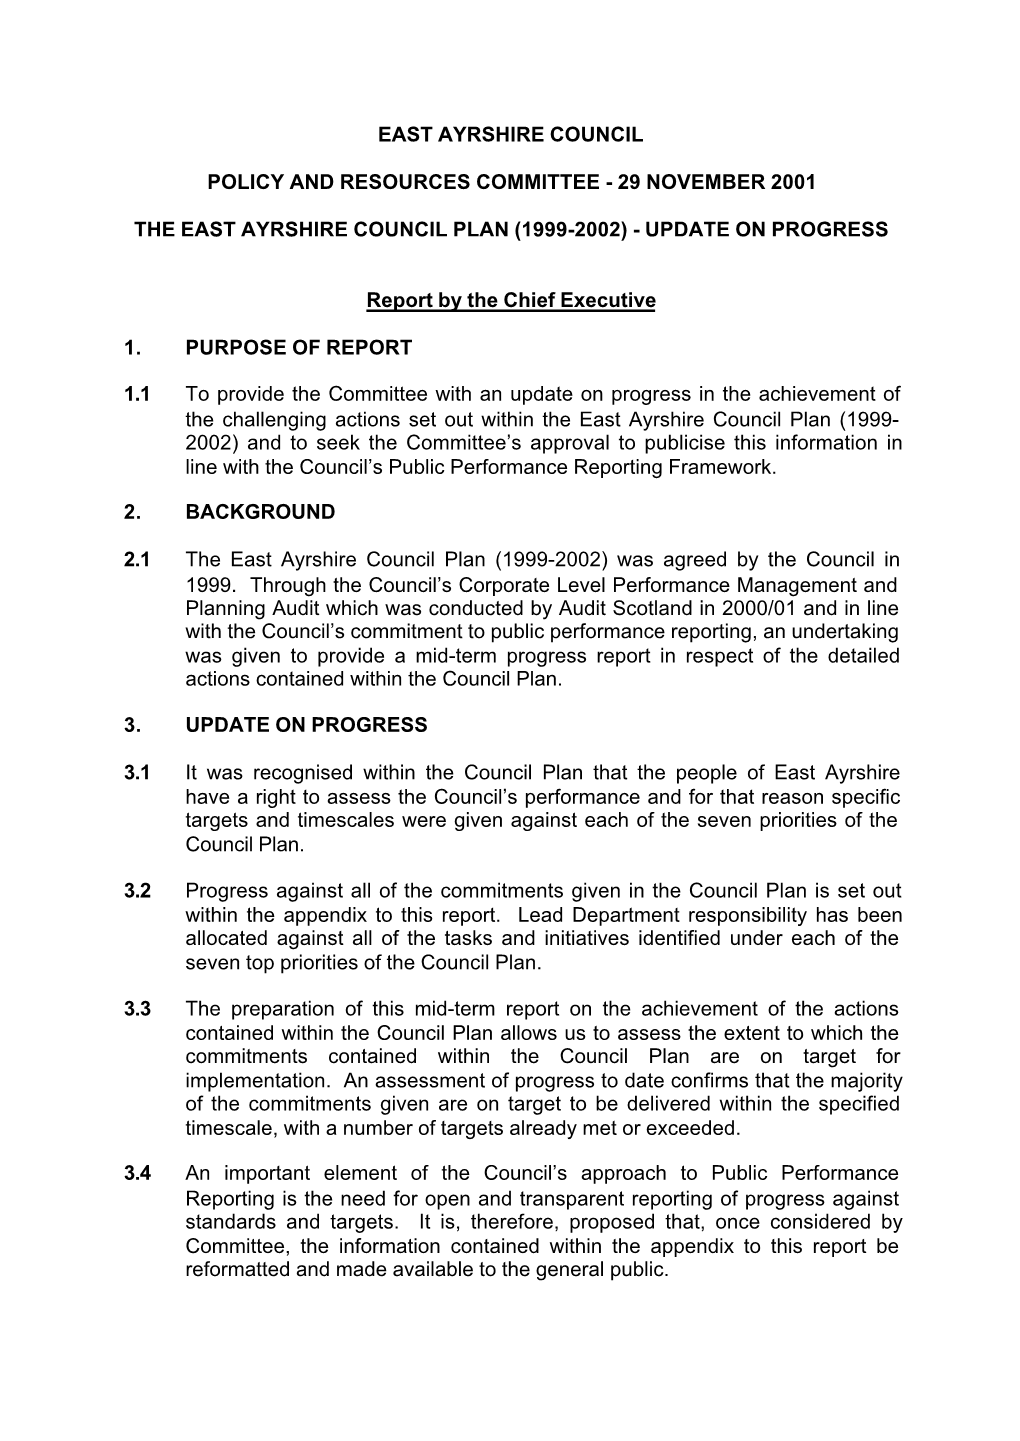 The East Ayrshire Council Plan 1999-2002